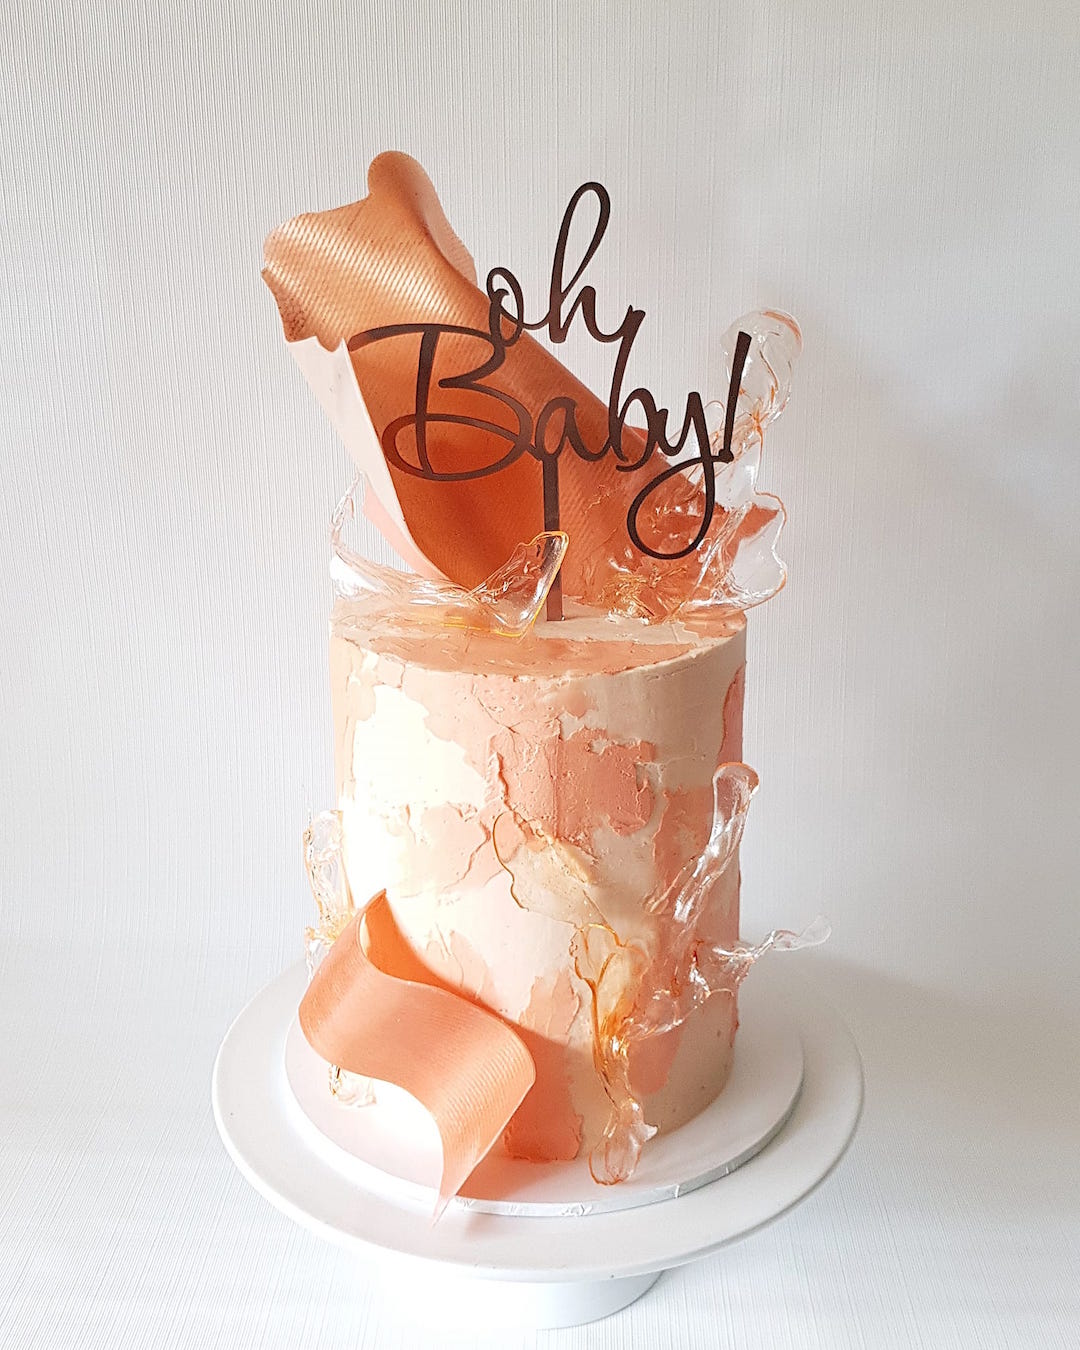 Modern Paintstroke Cake in Adelaide by Brown Sugared Love.